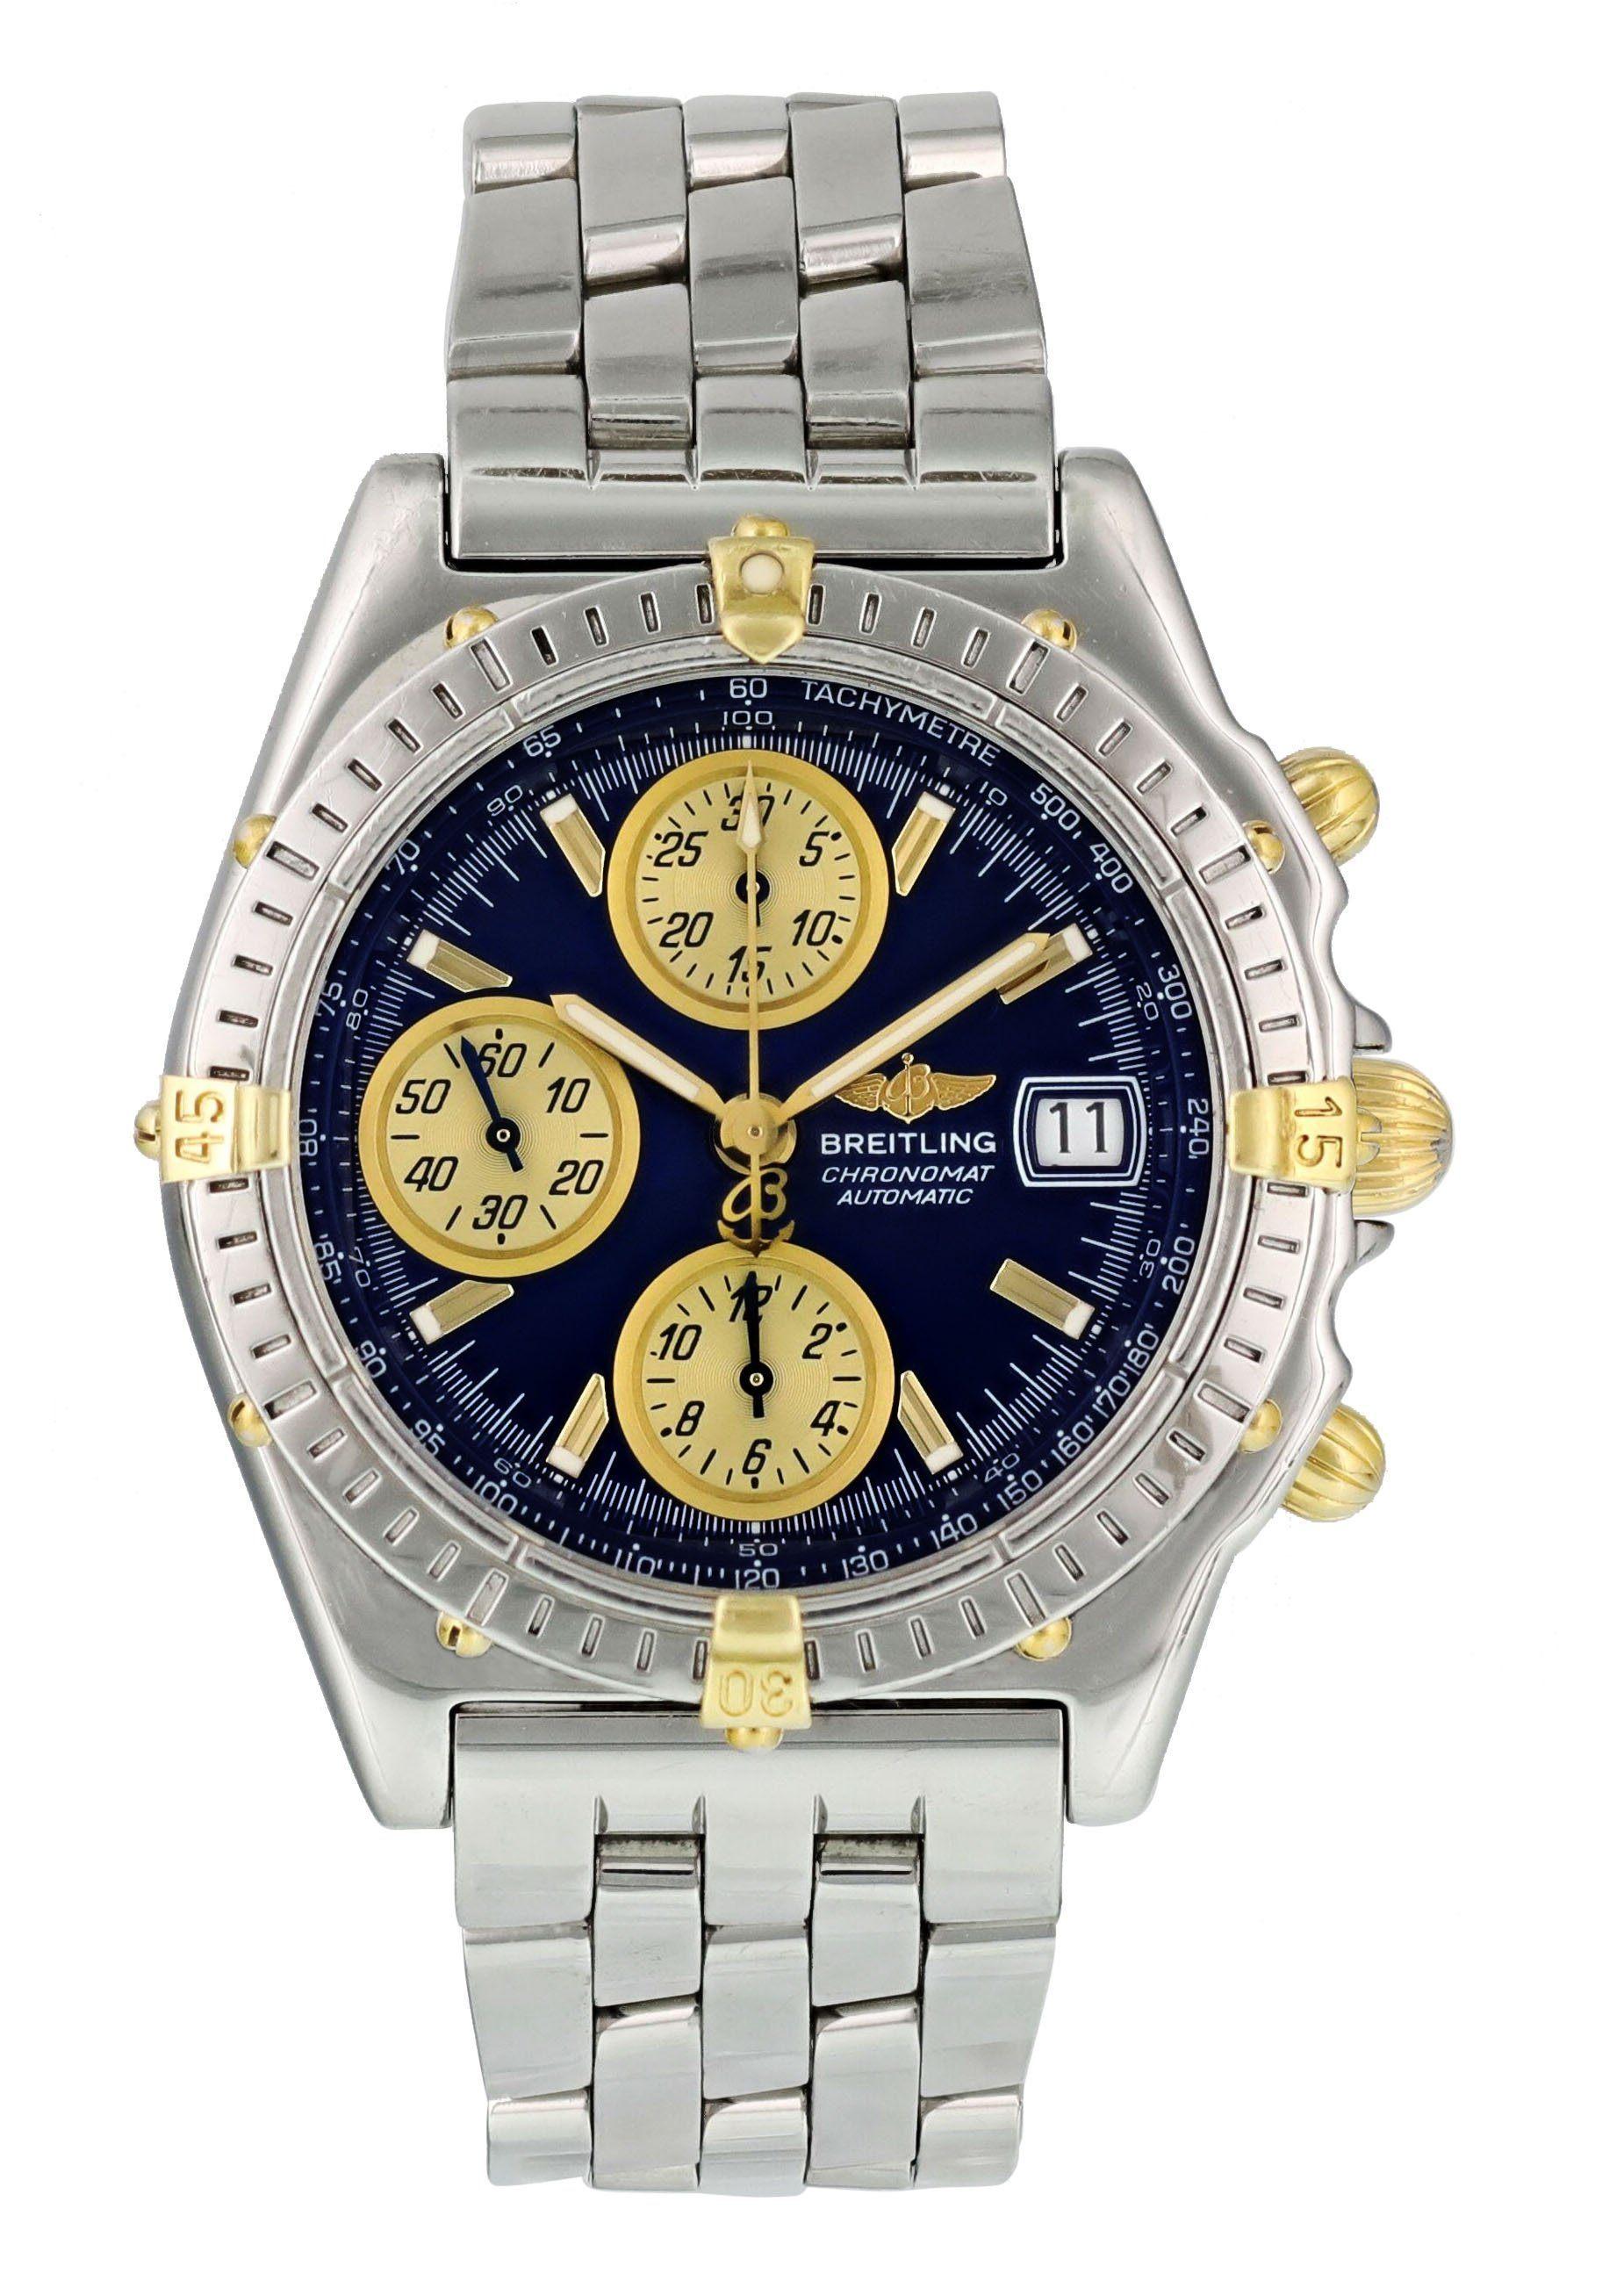 Breitling Chronomat  B13050 Men Watch. 
39mm Stainless Steel case. 
Steel and 18K Gold Unidirectional rotating bezel. 
Blue dial with luminous gold hands and index hour markers. 
Minute markers on the outer dial. 
Date display at the 3 o'clock